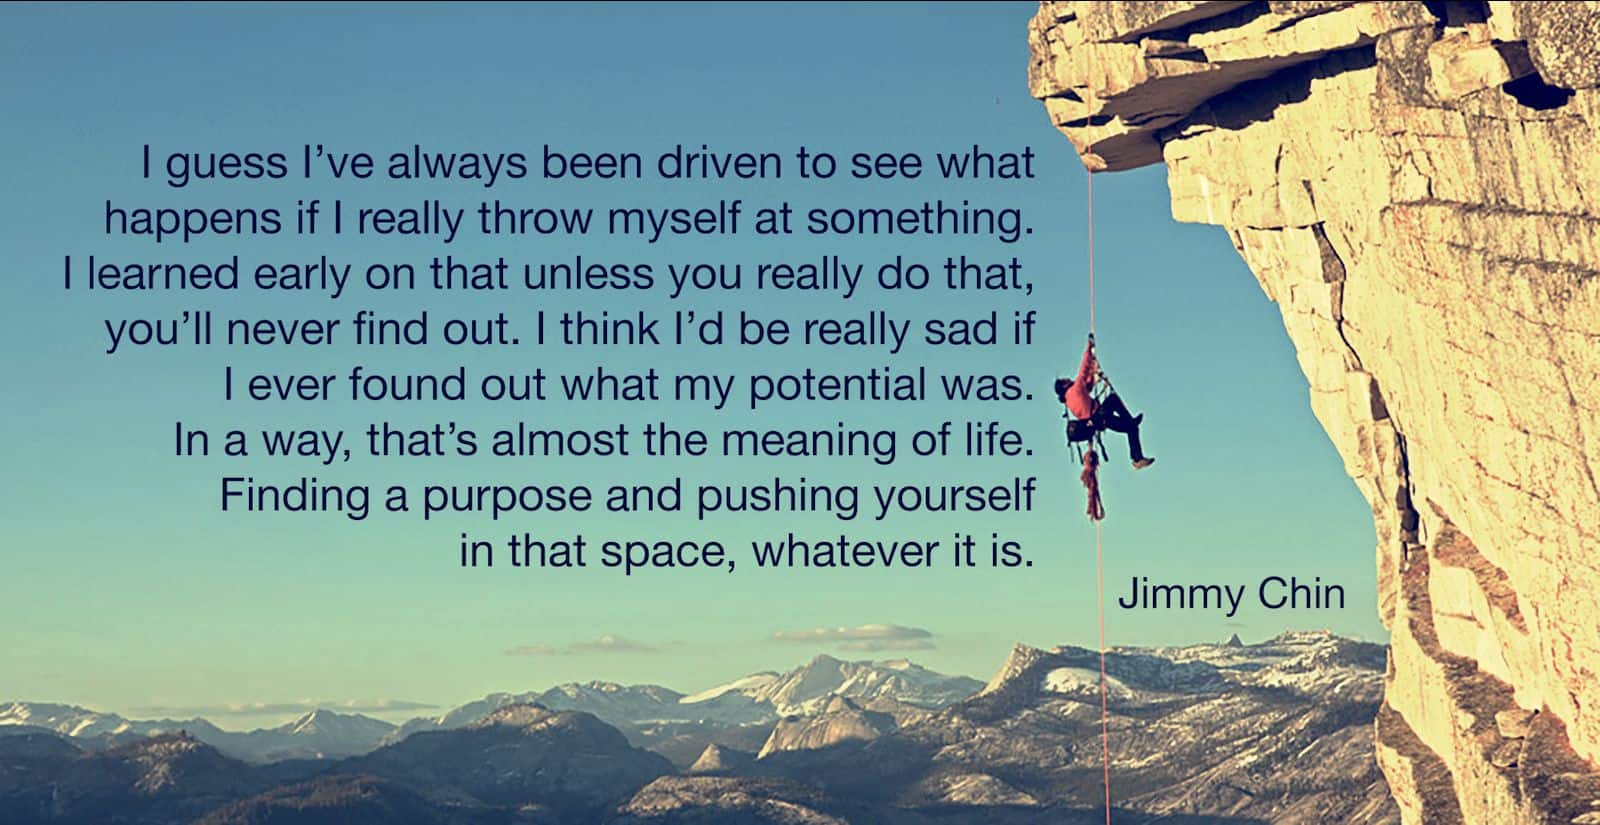 Jimmy Chin quote about learning